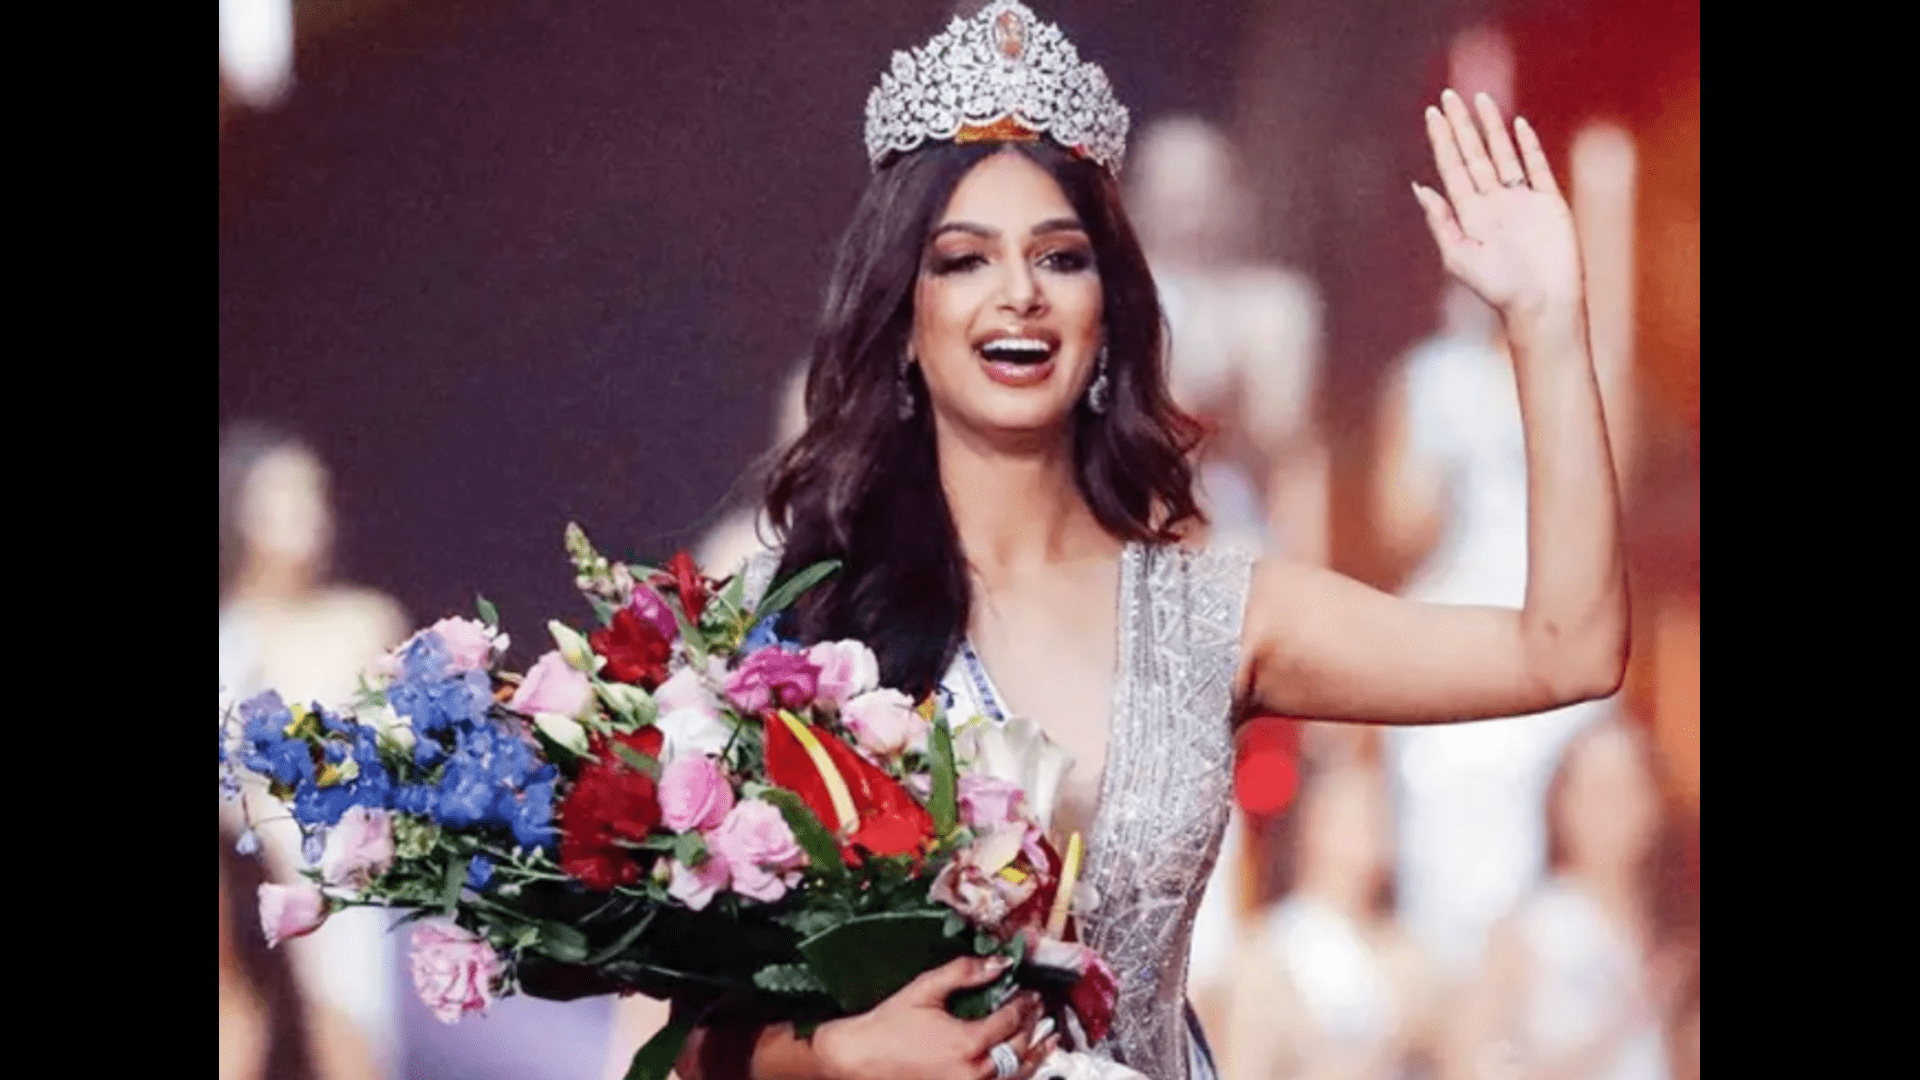 ”miss-universe-2021-discusses-the-illness-that-drives-her-to-gain-weight”